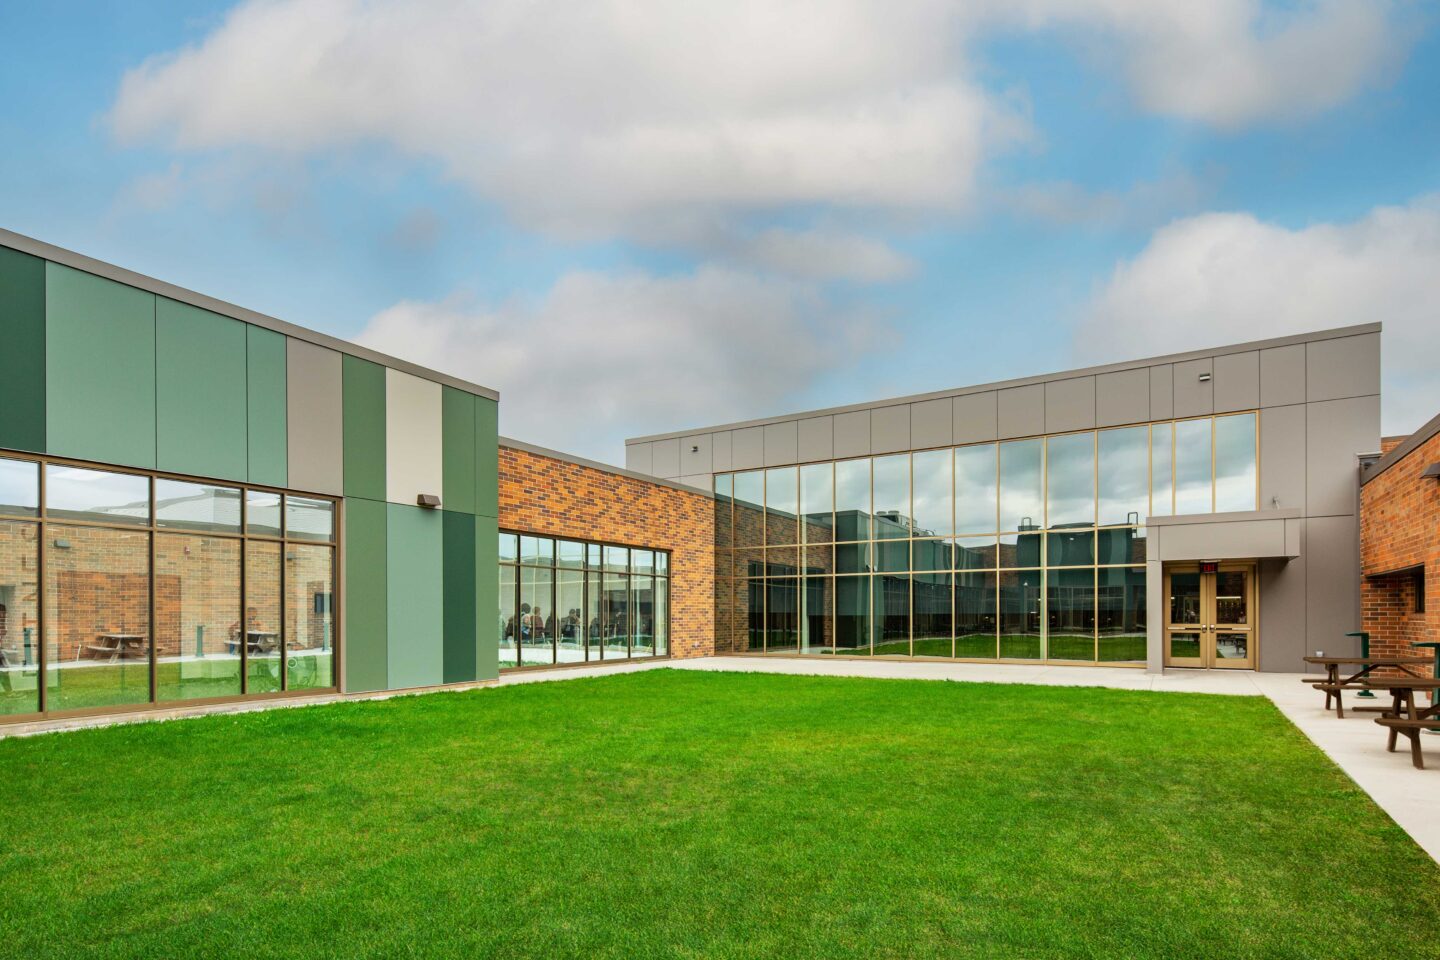 New and renovated spaces surround a grassy courtyard at Fall Creek High School